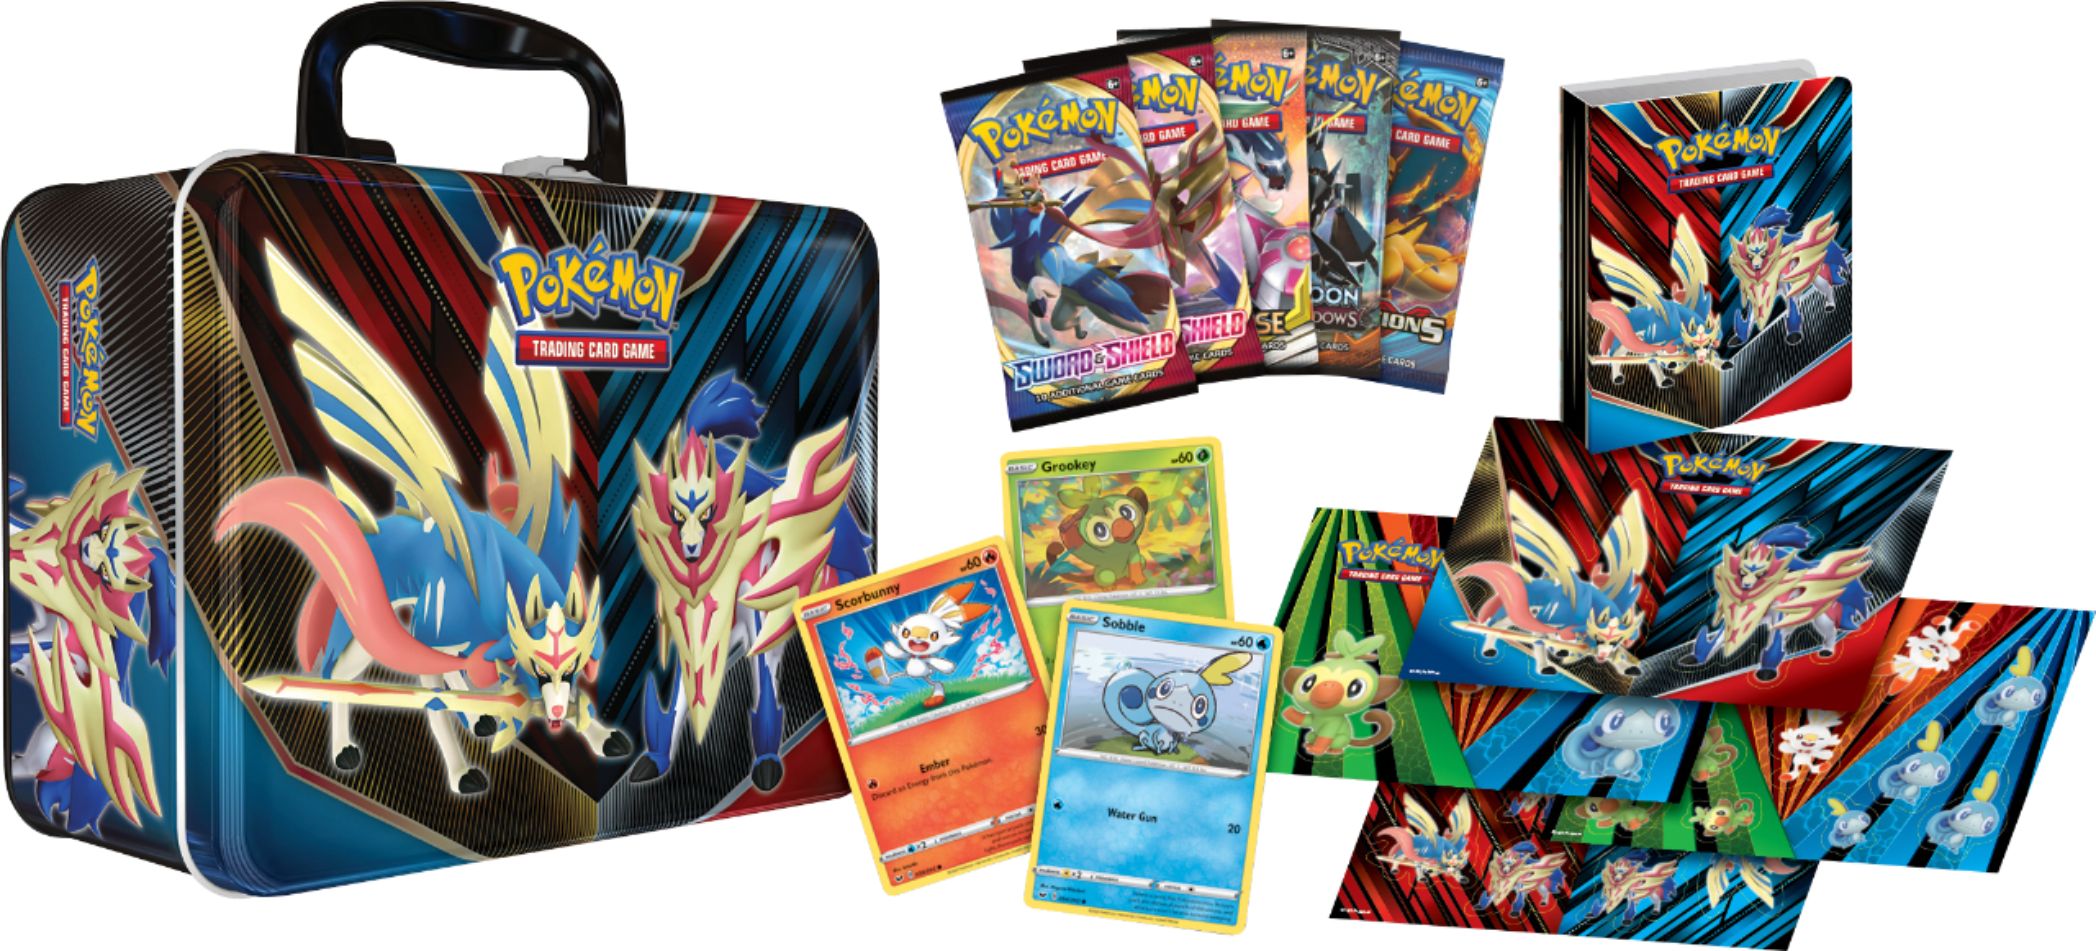 Pokemon TCG Card Game Collector's Tin Chest Lunchbox 2017 5 Booster Packs 